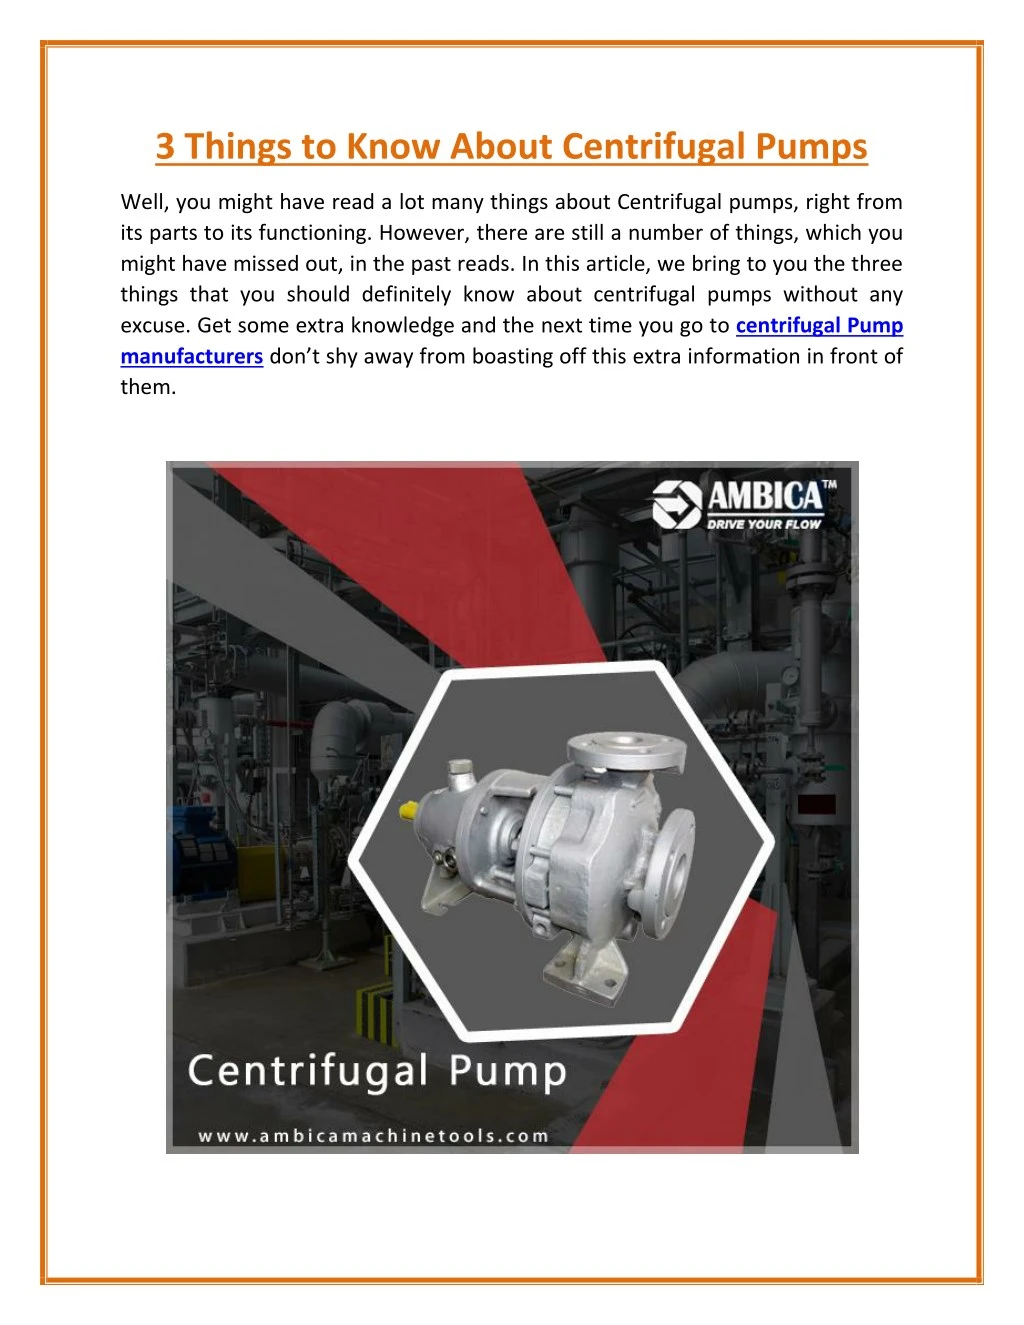 3 things to know about centrifugal pumps